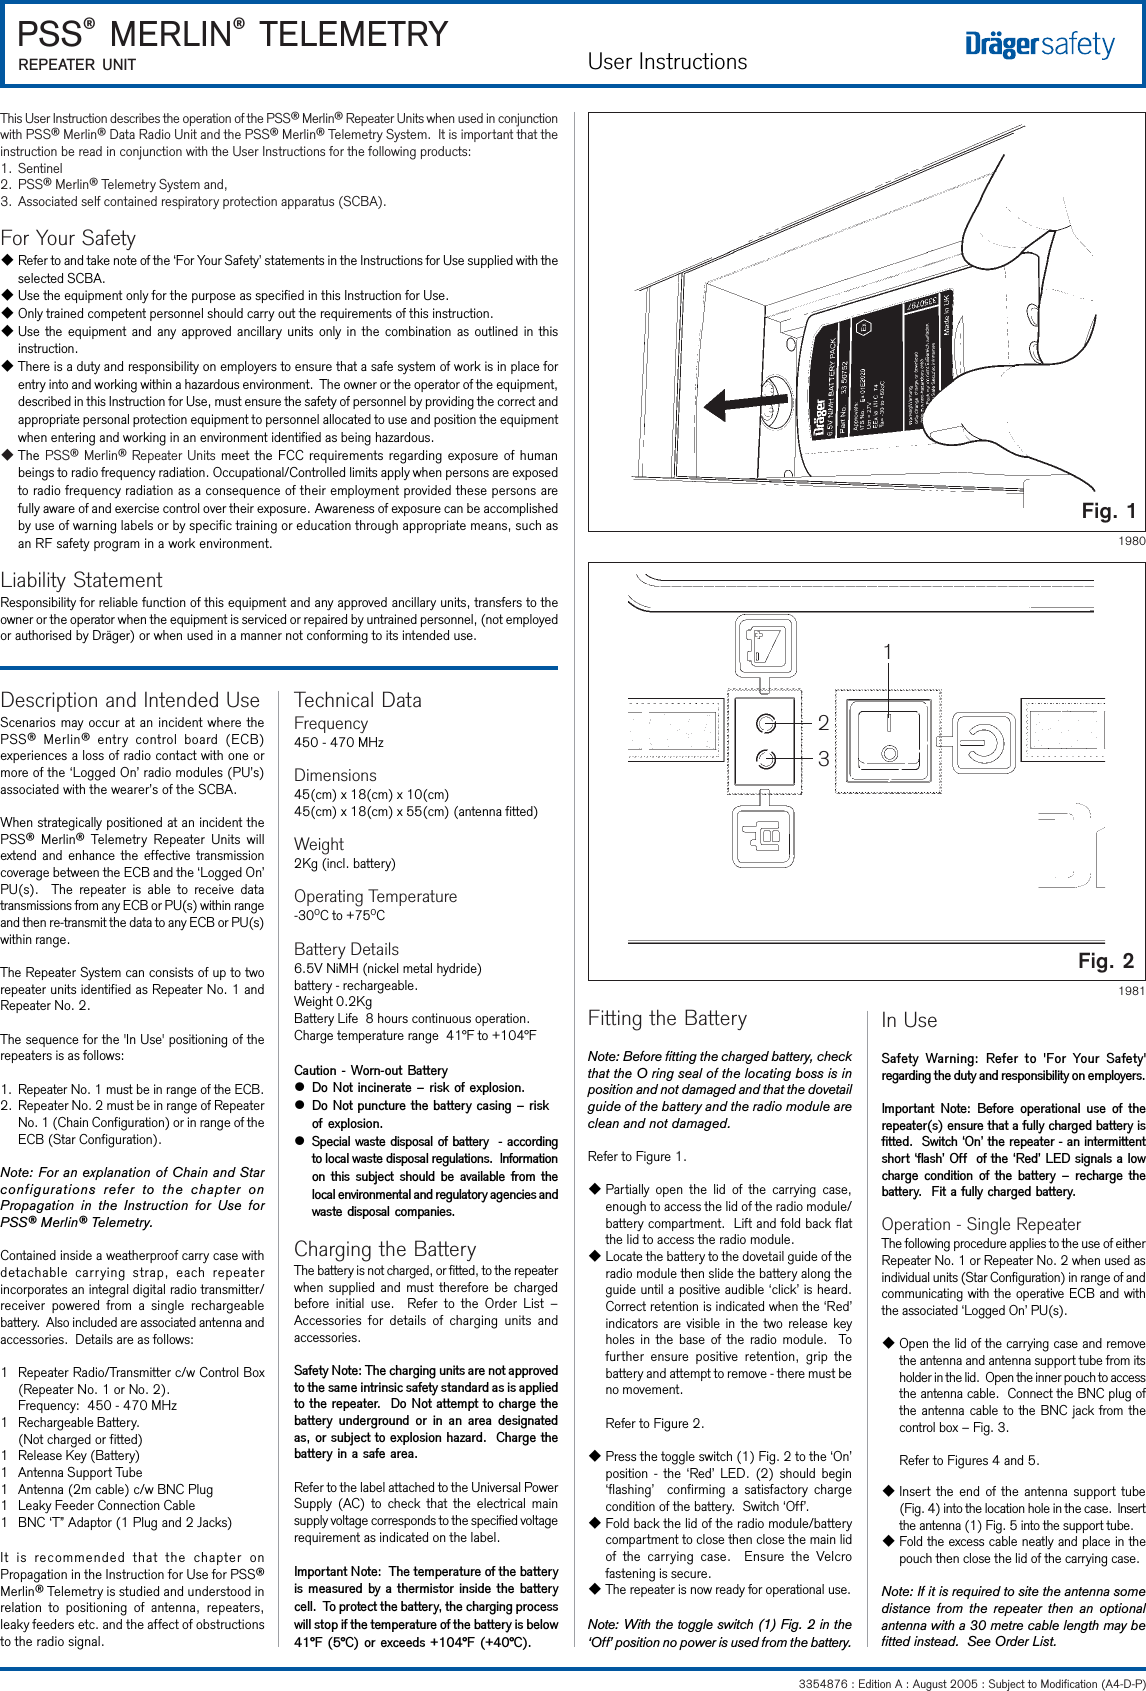 User Instructions3354876 : Edition A : August 2005 : Subject to Modification (A4-D-P) PSS® MERLIN® TELEMETRYREPEATER UNITThis User Instruction describes the operation of the PSS® Merlin® Repeater Units when used in conjunctionwith PSS® Merlin® Data Radio Unit and the PSS® Merlin® Telemetry System.  It is important that theinstruction be read in conjunction with the User Instructions for the following products:1. Sentinel2. PSS® Merlin® Telemetry System and,3. Associated self contained respiratory protection apparatus (SCBA).For Your SafetyuRefer to and take note of the ‘For Your Safety’ statements in the Instructions for Use supplied with theselected SCBA.uUse the equipment only for the purpose as specified in this Instruction for Use.uOnly trained competent personnel should carry out the requirements of this instruction.uUse the equipment and any approved ancillary units only in the combination as outlined in thisinstruction.uThere is a duty and responsibility on employers to ensure that a safe system of work is in place forentry into and working within a hazardous environment.  The owner or the operator of the equipment,described in this Instruction for Use, must ensure the safety of personnel by providing the correct andappropriate personal protection equipment to personnel allocated to use and position the equipmentwhen entering and working in an environment identified as being hazardous.uThe PSS® Merlin® Repeater Units meet the FCC requirements regarding exposure of humanbeings to radio frequency radiation. Occupational/Controlled limits apply when persons are exposedto radio frequency radiation as a consequence of their employment provided these persons arefully aware of and exercise control over their exposure. Awareness of exposure can be accomplishedby use of warning labels or by specific training or education through appropriate means, such asan RF safety program in a work environment.Liability StatementResponsibility for reliable function of this equipment and any approved ancillary units, transfers to theowner or the operator when the equipment is serviced or repaired by untrained personnel, (not employedor authorised by Dräger) or when used in a manner not conforming to its intended use.Description and Intended UseScenarios may occur at an incident where thePSS® Merlin® entry control board (ECB)experiences a loss of radio contact with one ormore of the ‘Logged On’ radio modules (PU’s)associated with the wearer’s of the SCBA.When strategically positioned at an incident thePSS® Merlin® Telemetry Repeater Units willextend and enhance the effective transmissioncoverage between the ECB and the ‘Logged On’PU(s).  The repeater is able to receive datatransmissions from any ECB or PU(s) within rangeand then re-transmit the data to any ECB or PU(s)within range.The Repeater System can consists of up to tworepeater units identified as Repeater No. 1 andRepeater No. 2.The sequence for the &apos;In Use&apos; positioning of therepeaters is as follows:1. Repeater No. 1 must be in range of the ECB.2. Repeater No. 2 must be in range of RepeaterNo. 1 (Chain Configuration) or in range of theECB (Star Configuration).Note: For an explanation of Chain and Starconfigurations refer to the chapter onPropagation in the Instruction for Use forPSS® Merlin® Telemetry.Contained inside a weatherproof carry case withdetachable carrying strap, each repeaterincorporates an integral digital radio transmitter/receiver powered from a single rechargeablebattery.  Also included are associated antenna andaccessories.  Details are as follows:1 Repeater Radio/Transmitter c/w Control Box(Repeater No. 1 or No. 2).Frequency:  450 - 470 MHz1 Rechargeable Battery.(Not charged or fitted)1 Release Key (Battery)1 Antenna Support Tube1 Antenna (2m cable) c/w BNC Plug1 Leaky Feeder Connection Cable1 BNC ‘T” Adaptor (1 Plug and 2 Jacks)It is recommended that the chapter onPropagation in the Instruction for Use for PSS®Merlin® Telemetry is studied and understood inrelation to positioning of antenna, repeaters,leaky feeders etc. and the affect of obstructionsto the radio signal.Technical DataFrequency450 - 470 MHzDimensions45(cm) x 18(cm) x 10(cm)45(cm) x 18(cm) x 55(cm) (antenna fitted)Weight2Kg (incl. battery)Operating Temperature-30OC to +75OCBattery Details6.5V NiMH (nickel metal hydride)battery - rechargeable.Weight 0.2KgBattery Life  8 hours continuous operation.Charge temperature range  41°F to +104°FCaution - Worn-out BatterylDo Not incinerate  risk of explosion.lDo Not puncture the battery casing  riskof explosion.lSpecial waste disposal of battery  - accordingto local waste disposal regulations.  Informationon  this  subject  should be  available  from thelocal environmental and regulatory agencies andwaste disposal companies.Charging the BatteryThe battery is not charged, or fitted, to the repeaterwhen supplied and must therefore be chargedbefore initial use.  Refer to the Order List –Accessories for details of charging units andaccessories.Safety Note: The charging units are not approvedto the same intrinsic safety standard as is appliedto the repeater.  Do Not attempt to charge thebattery  underground or  in an  area designatedas, or subject to explosion hazard.  Charge thebattery in a safe area.Refer to the label attached to the Universal PowerSupply (AC) to check that the electrical mainsupply voltage corresponds to the specified voltagerequirement as indicated on the label.Important Note:  The temperature of the batteryis measured by a thermistor inside the batterycell.  To protect the battery, the charging processwill stop if the temperature of the battery is below41°F (5°C) or exceeds +104°F (+40°C).Fitting the BatteryNote: Before fitting the charged battery, checkthat the O ring seal of the locating boss is inposition and not damaged and that the dovetailguide of the battery and the radio module areclean and not damaged.Refer to Figure 1.uPartially open the lid of the carrying case,enough to access the lid of the radio module/battery compartment.  Lift and fold back flatthe lid to access the radio module.uLocate the battery to the dovetail guide of theradio module then slide the battery along theguide until a positive audible ‘click’ is heard.Correct retention is indicated when the ‘Red’indicators are visible in the two release keyholes in the base of the radio module.  Tofurther ensure positive retention, grip thebattery and attempt to remove - there must beno movement.Refer to Figure 2.uPress the toggle switch (1) Fig. 2 to the ‘On’position - the ‘Red’ LED. (2) should begin‘flashing’  confirming a satisfactory chargecondition of the battery.  Switch ‘Off’.uFold back the lid of the radio module/batterycompartment to close then close the main lidof the carrying case.  Ensure the Velcrofastening is secure.uThe repeater is now ready for operational use.Note: With the toggle switch (1) Fig. 2 in the‘Off’ position no power is used from the battery.In UseSafety  Warning:  Refer  to  &apos;For  Your  Safety&apos;regarding the duty and responsibility on employers.Important  Note:  Before  operational  use  of  therepeater(s) ensure that a fully charged battery isfitted.  Switch On the repeater - an intermittentshort flash Off  of the Red LED signals a lowcharge  condition  of  the  battery    recharge  thebattery.  Fit a fully charged battery.Operation - Single RepeaterThe following procedure applies to the use of eitherRepeater No. 1 or Repeater No. 2 when used asindividual units (Star Configuration) in range of andcommunicating with the operative ECB and withthe associated ‘Logged On’ PU(s).uOpen the lid of the carrying case and removethe antenna and antenna support tube from itsholder in the lid.  Open the inner pouch to accessthe antenna cable.  Connect the BNC plug ofthe antenna cable to the BNC jack from thecontrol box – Fig. 3.Refer to Figures 4 and 5.uInsert the end of the antenna support tube(Fig. 4) into the location hole in the case.  Insertthe antenna (1) Fig. 5 into the support tube.uFold the excess cable neatly and place in thepouch then close the lid of the carrying case.Note: If it is required to site the antenna somedistance from the repeater then an optionalantenna with a 30 metre cable length may befitted instead.  See Order List.Fig. 2Fig. 119801231981